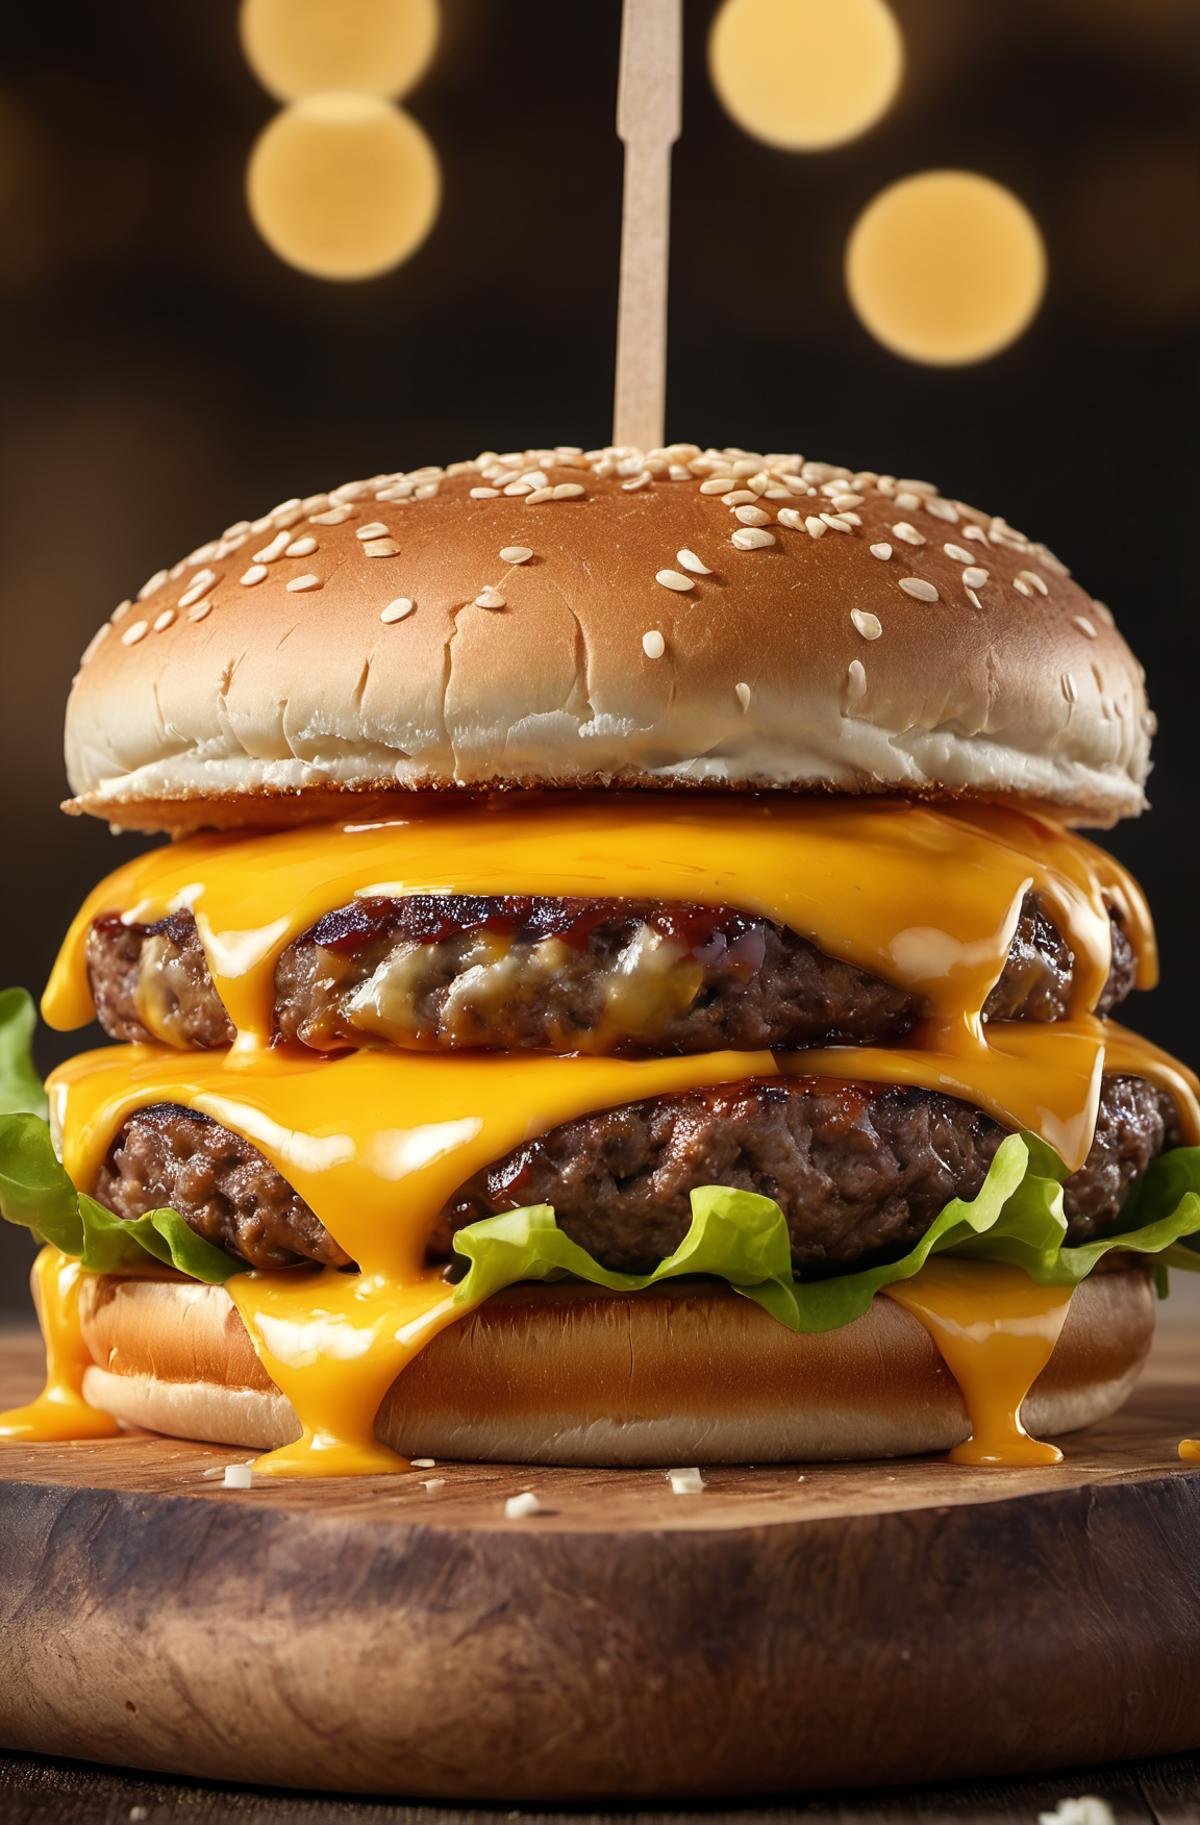 A close-up of a hamburger with cheese and lettuce.